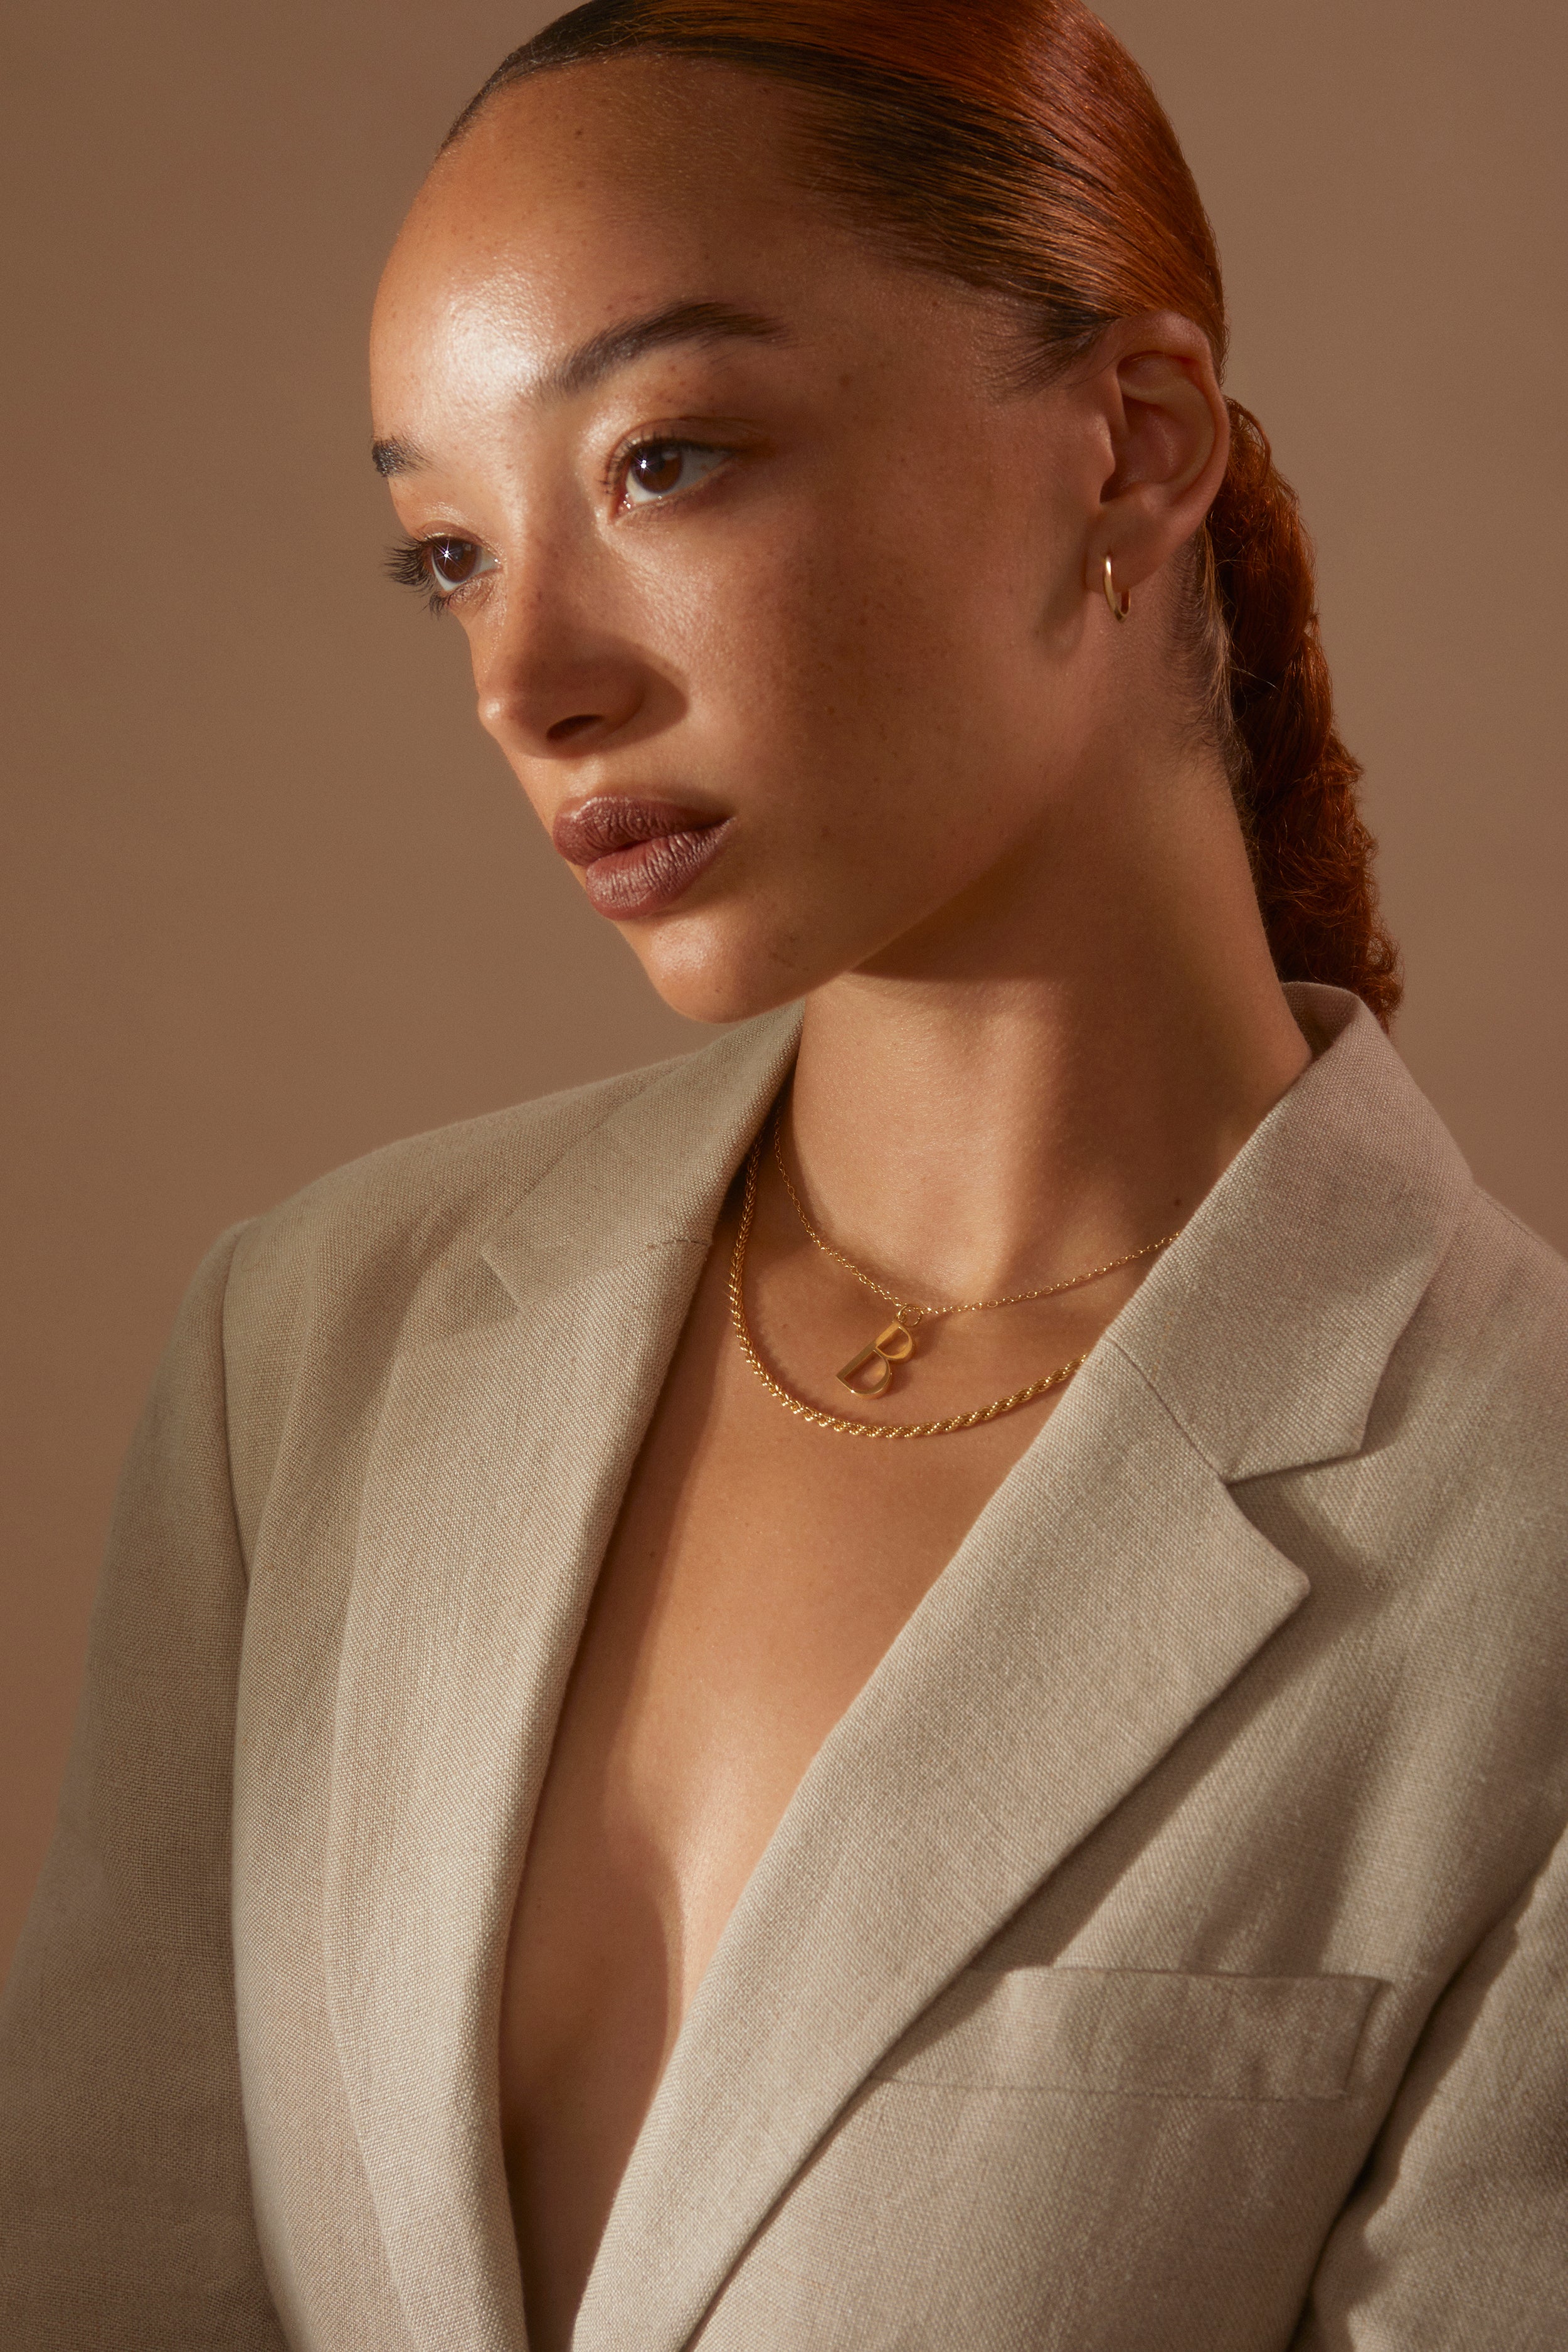 B Anne Initial worn by a model wearing a nude blazer and our Rosalind Chain Necklace